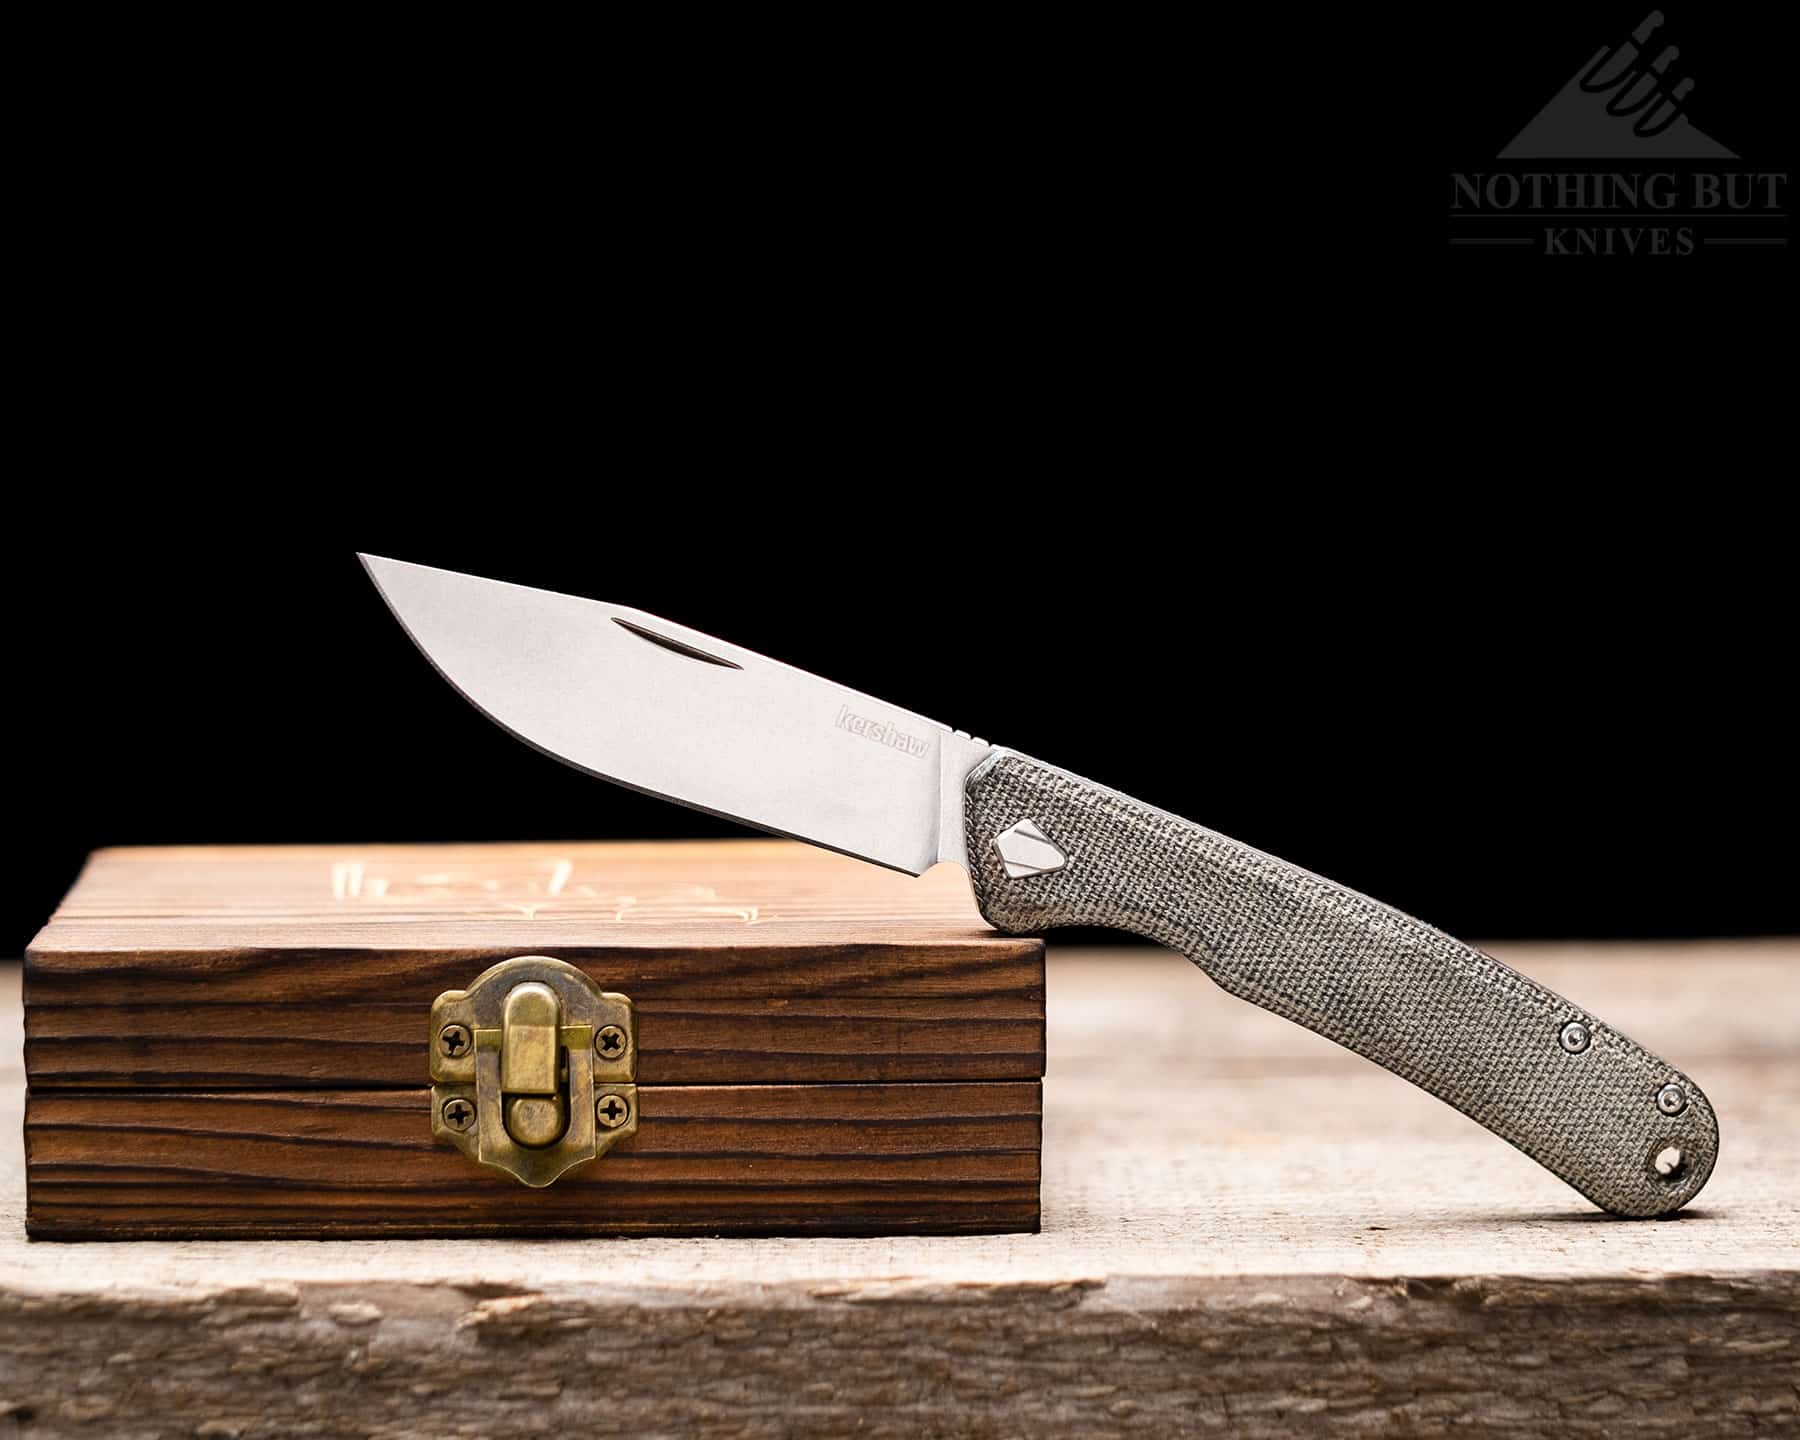 The Kershaw Federalist slip joint has a classic look and a practical blade design.